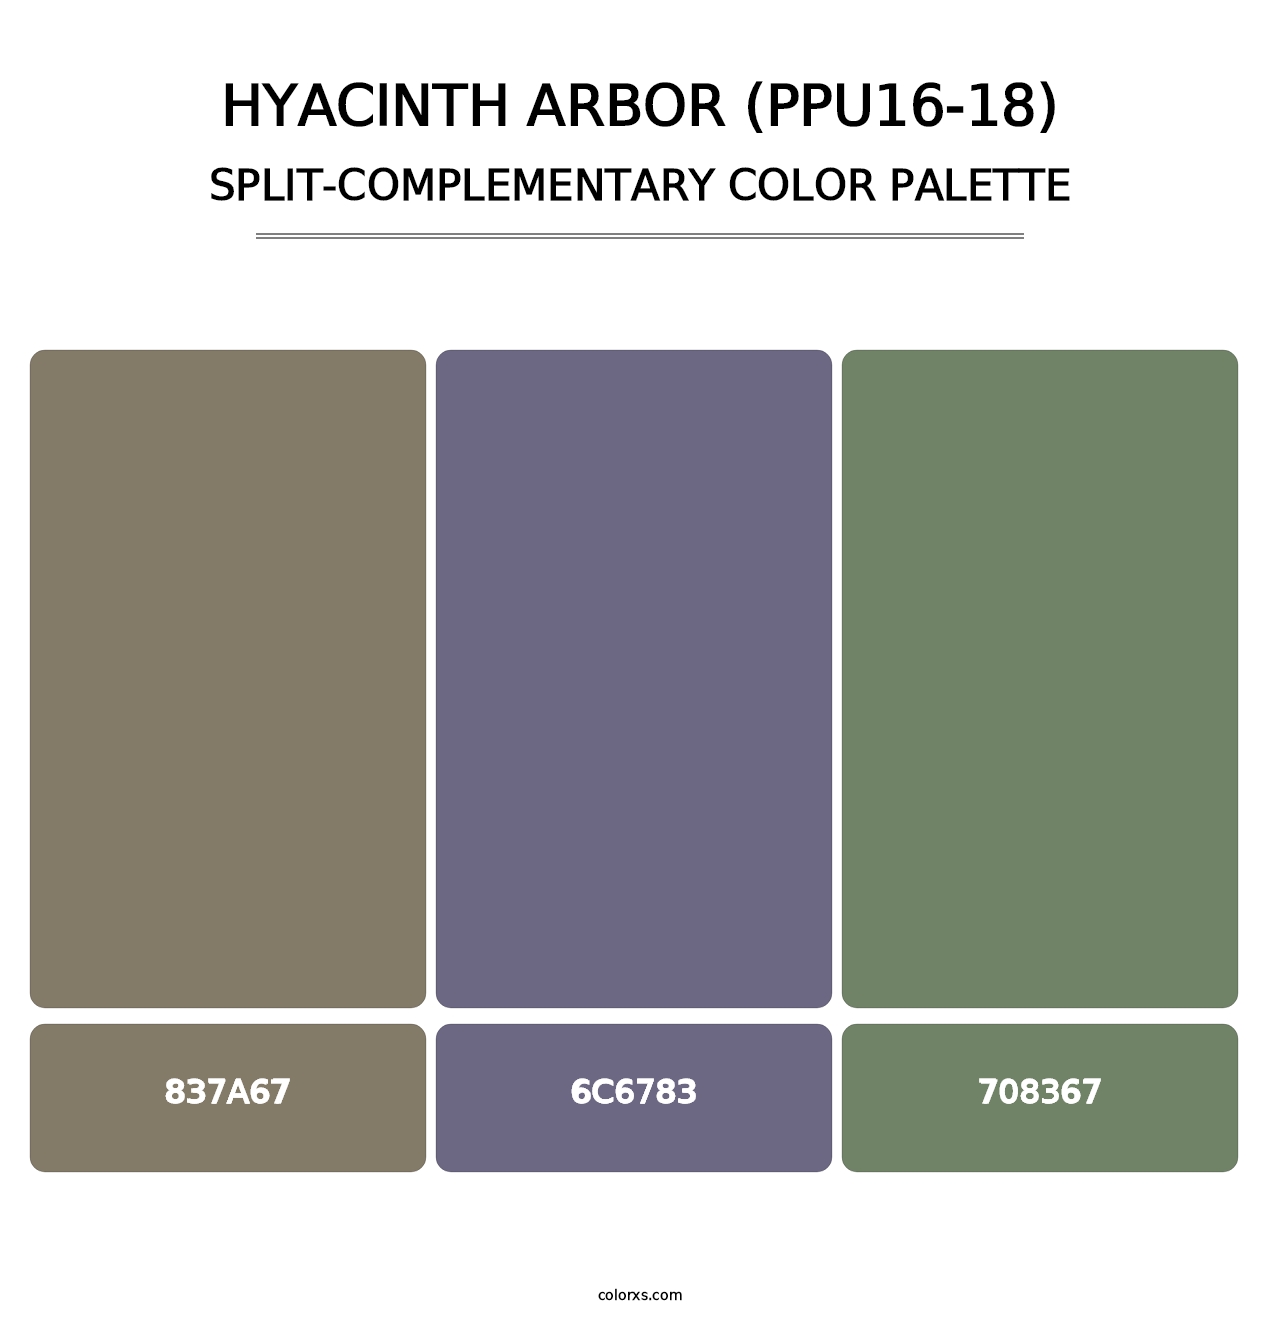 Hyacinth Arbor (PPU16-18) - Split-Complementary Color Palette